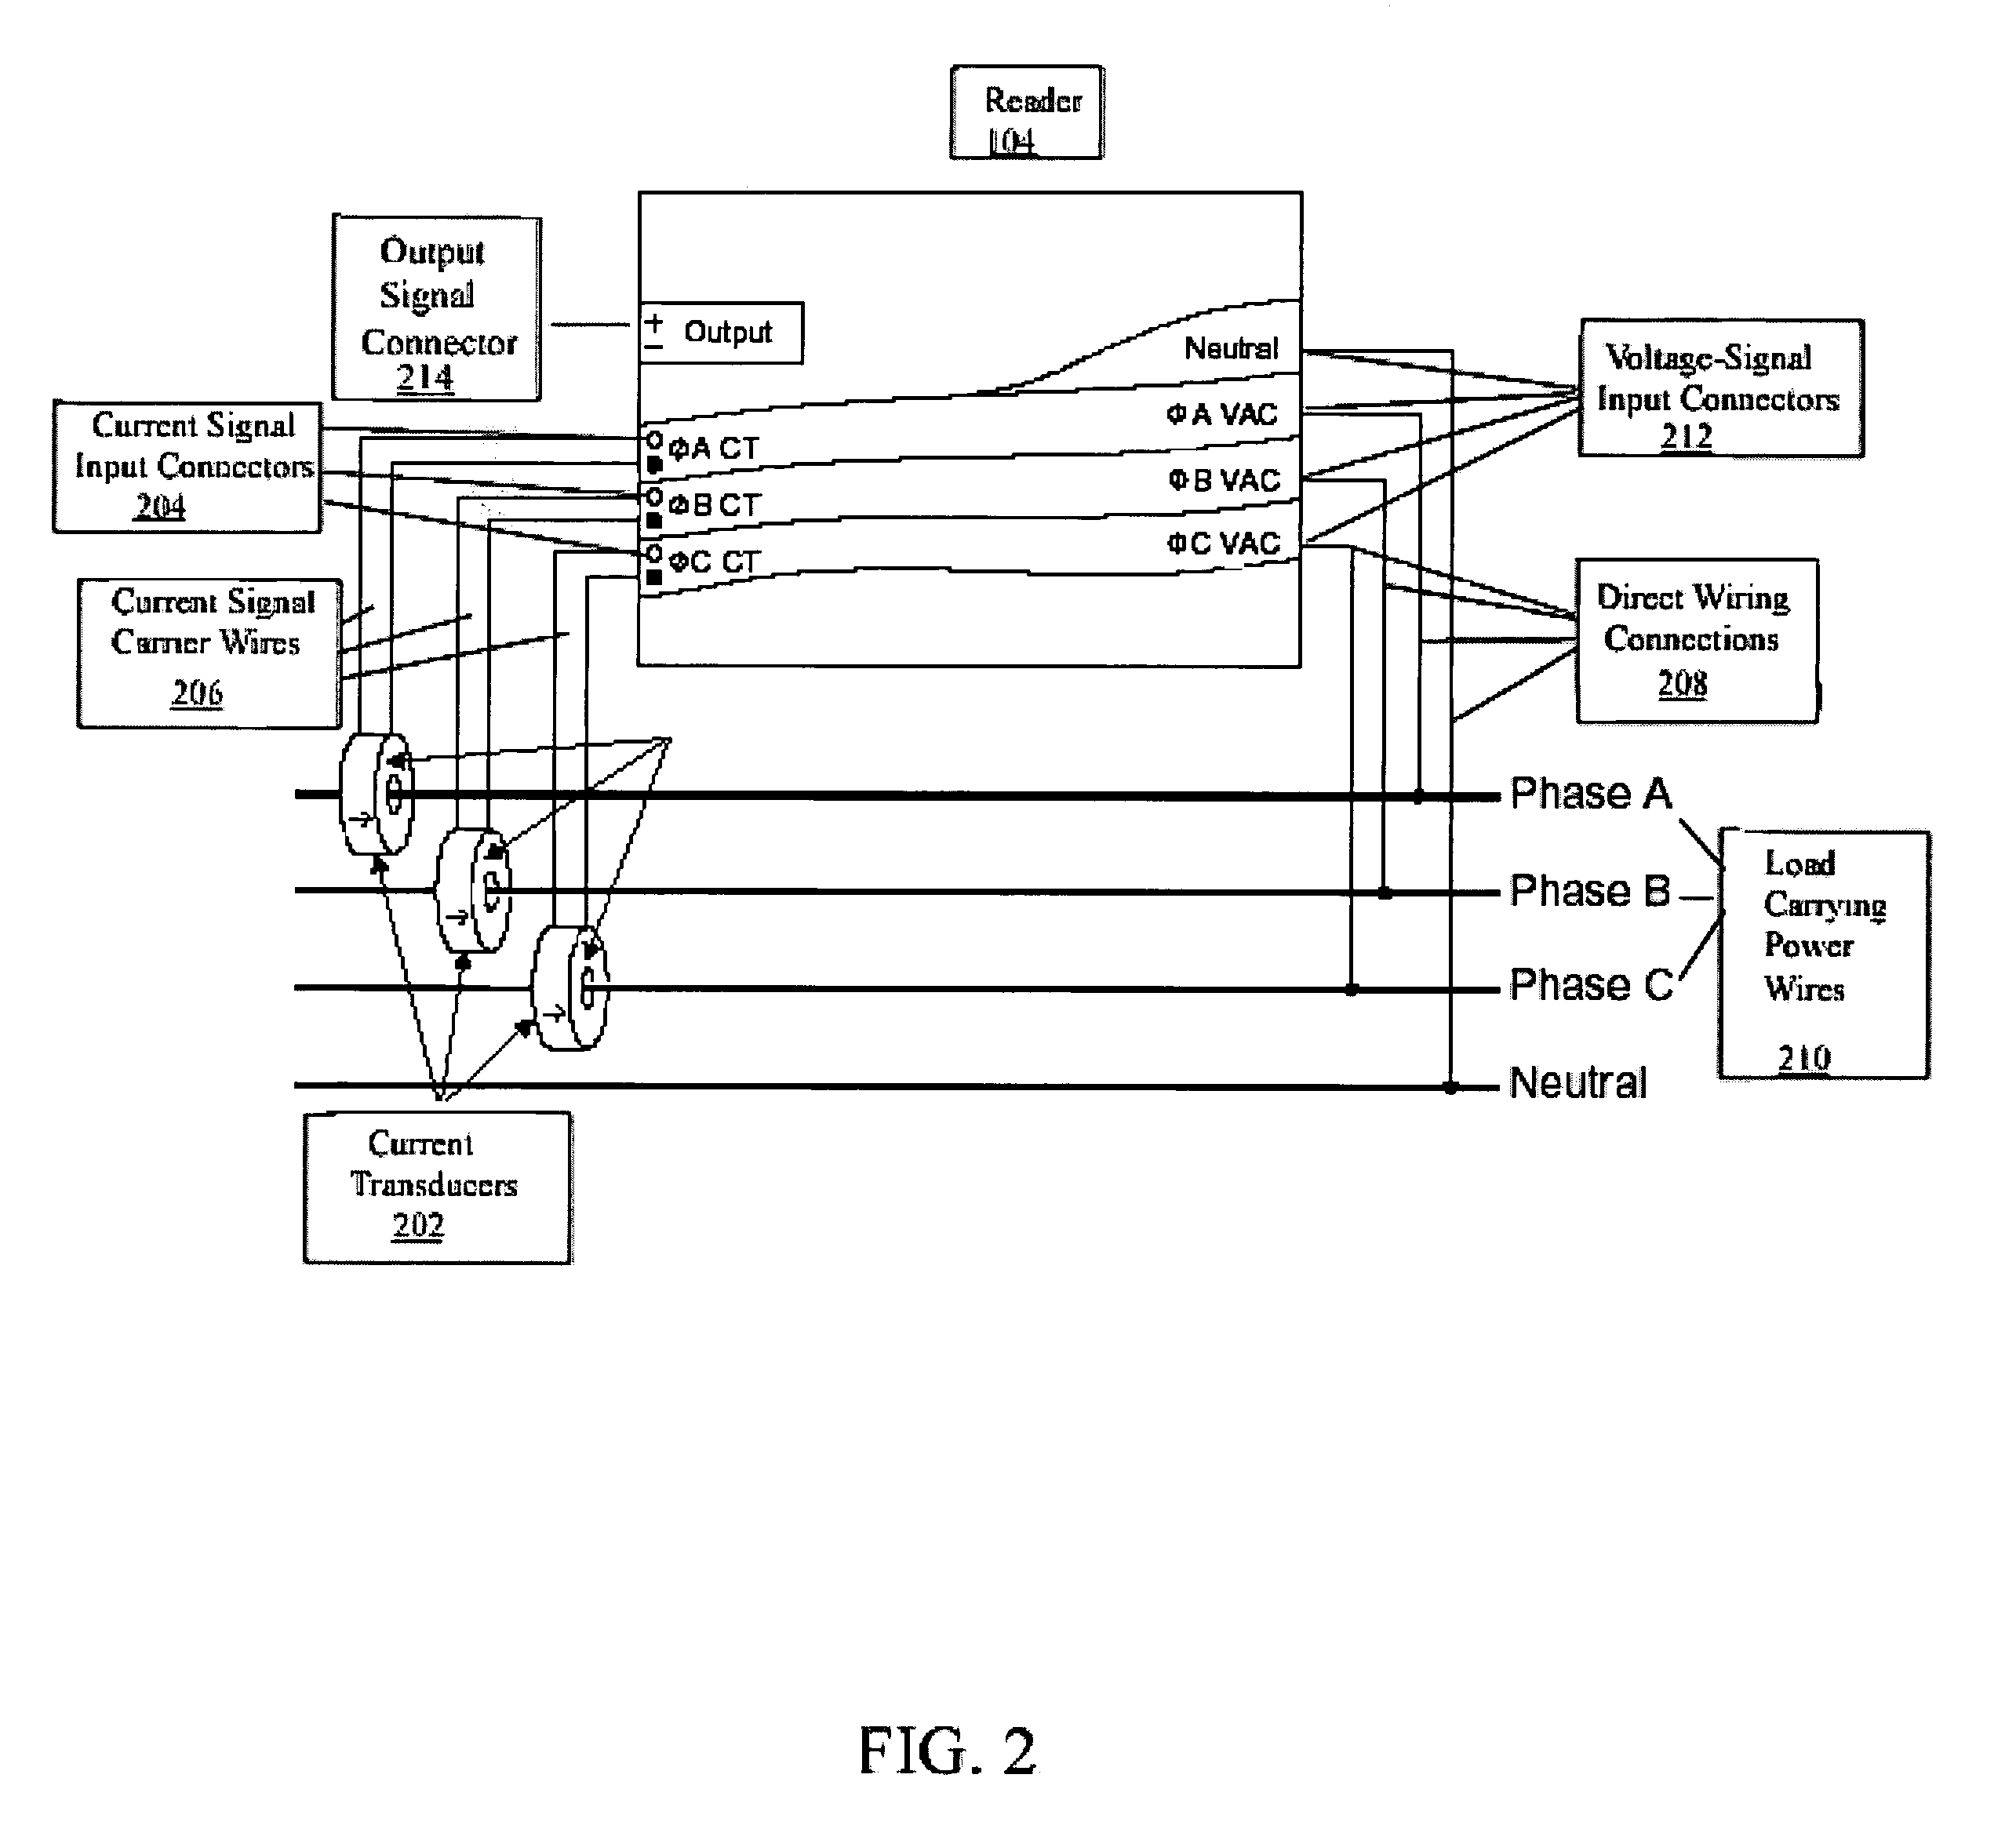 Method and apparatus for reading and controlling utility consumption